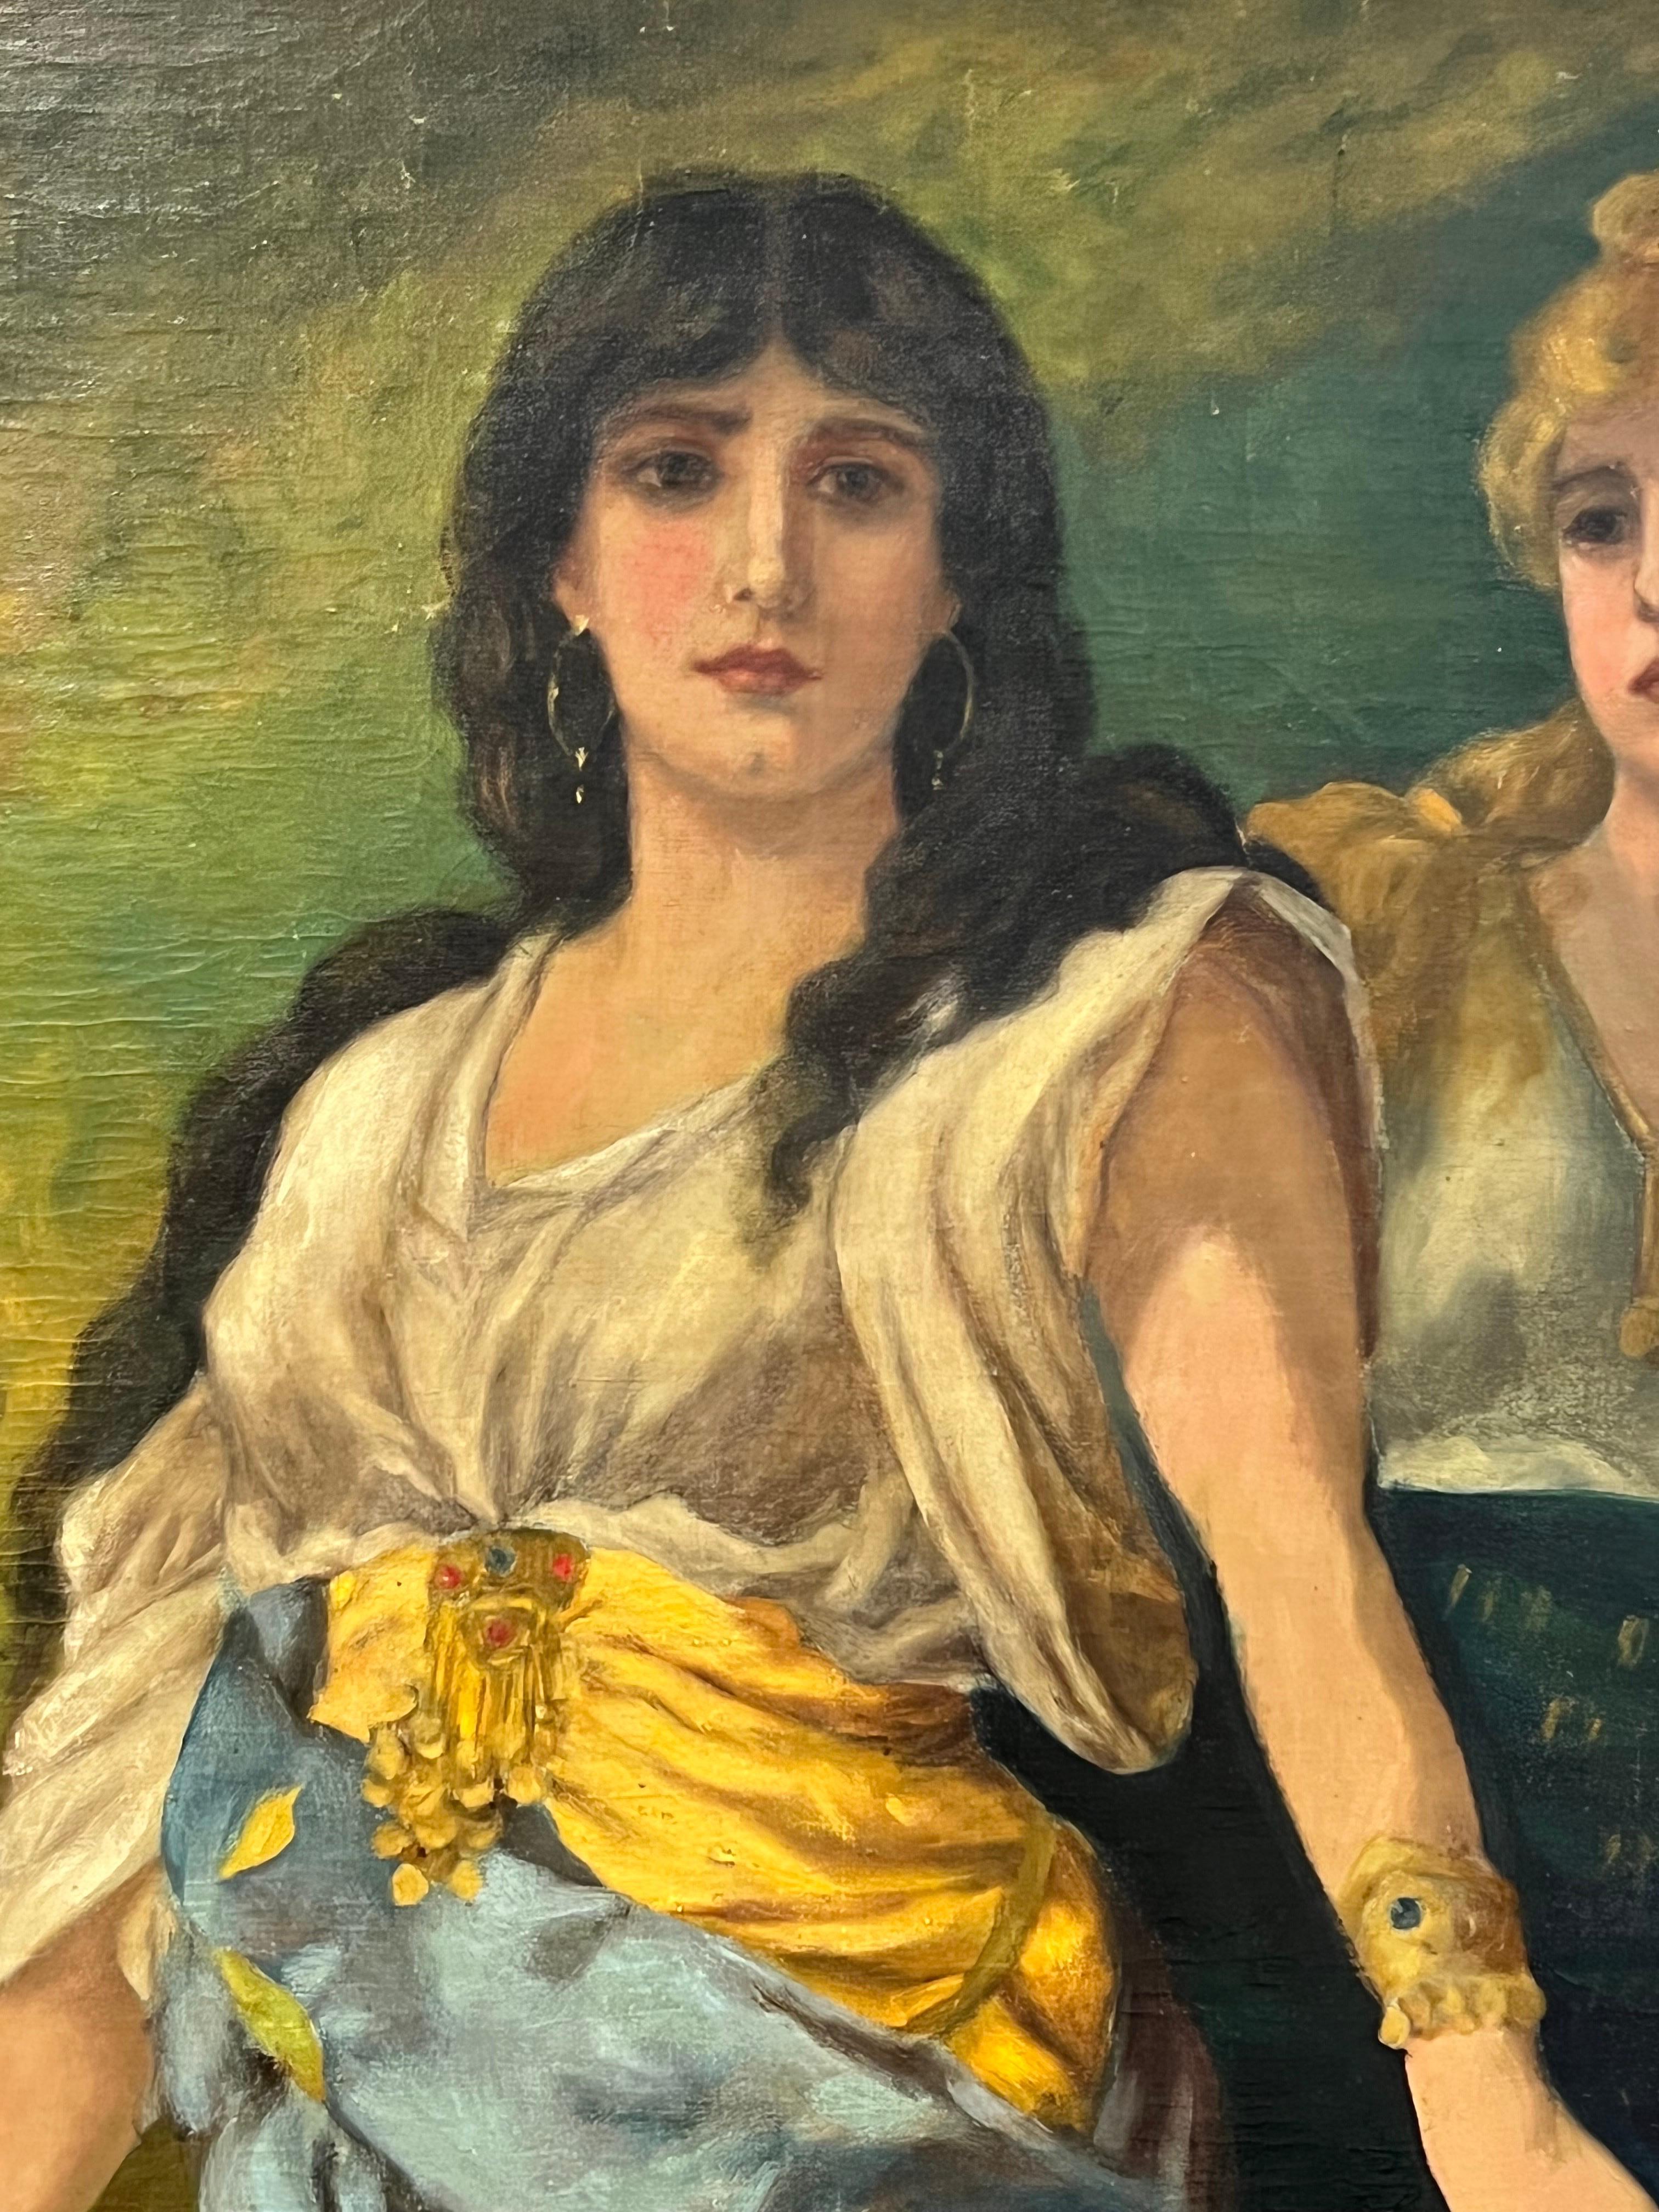 Stunning large scale antique portrait painting of two woman. The brunette woman is dressed elaborately in a blue sari wrap over a white blouse. She is holding a jeweled sword. The other woman is dressed in a much simpler dress.
Although there is no